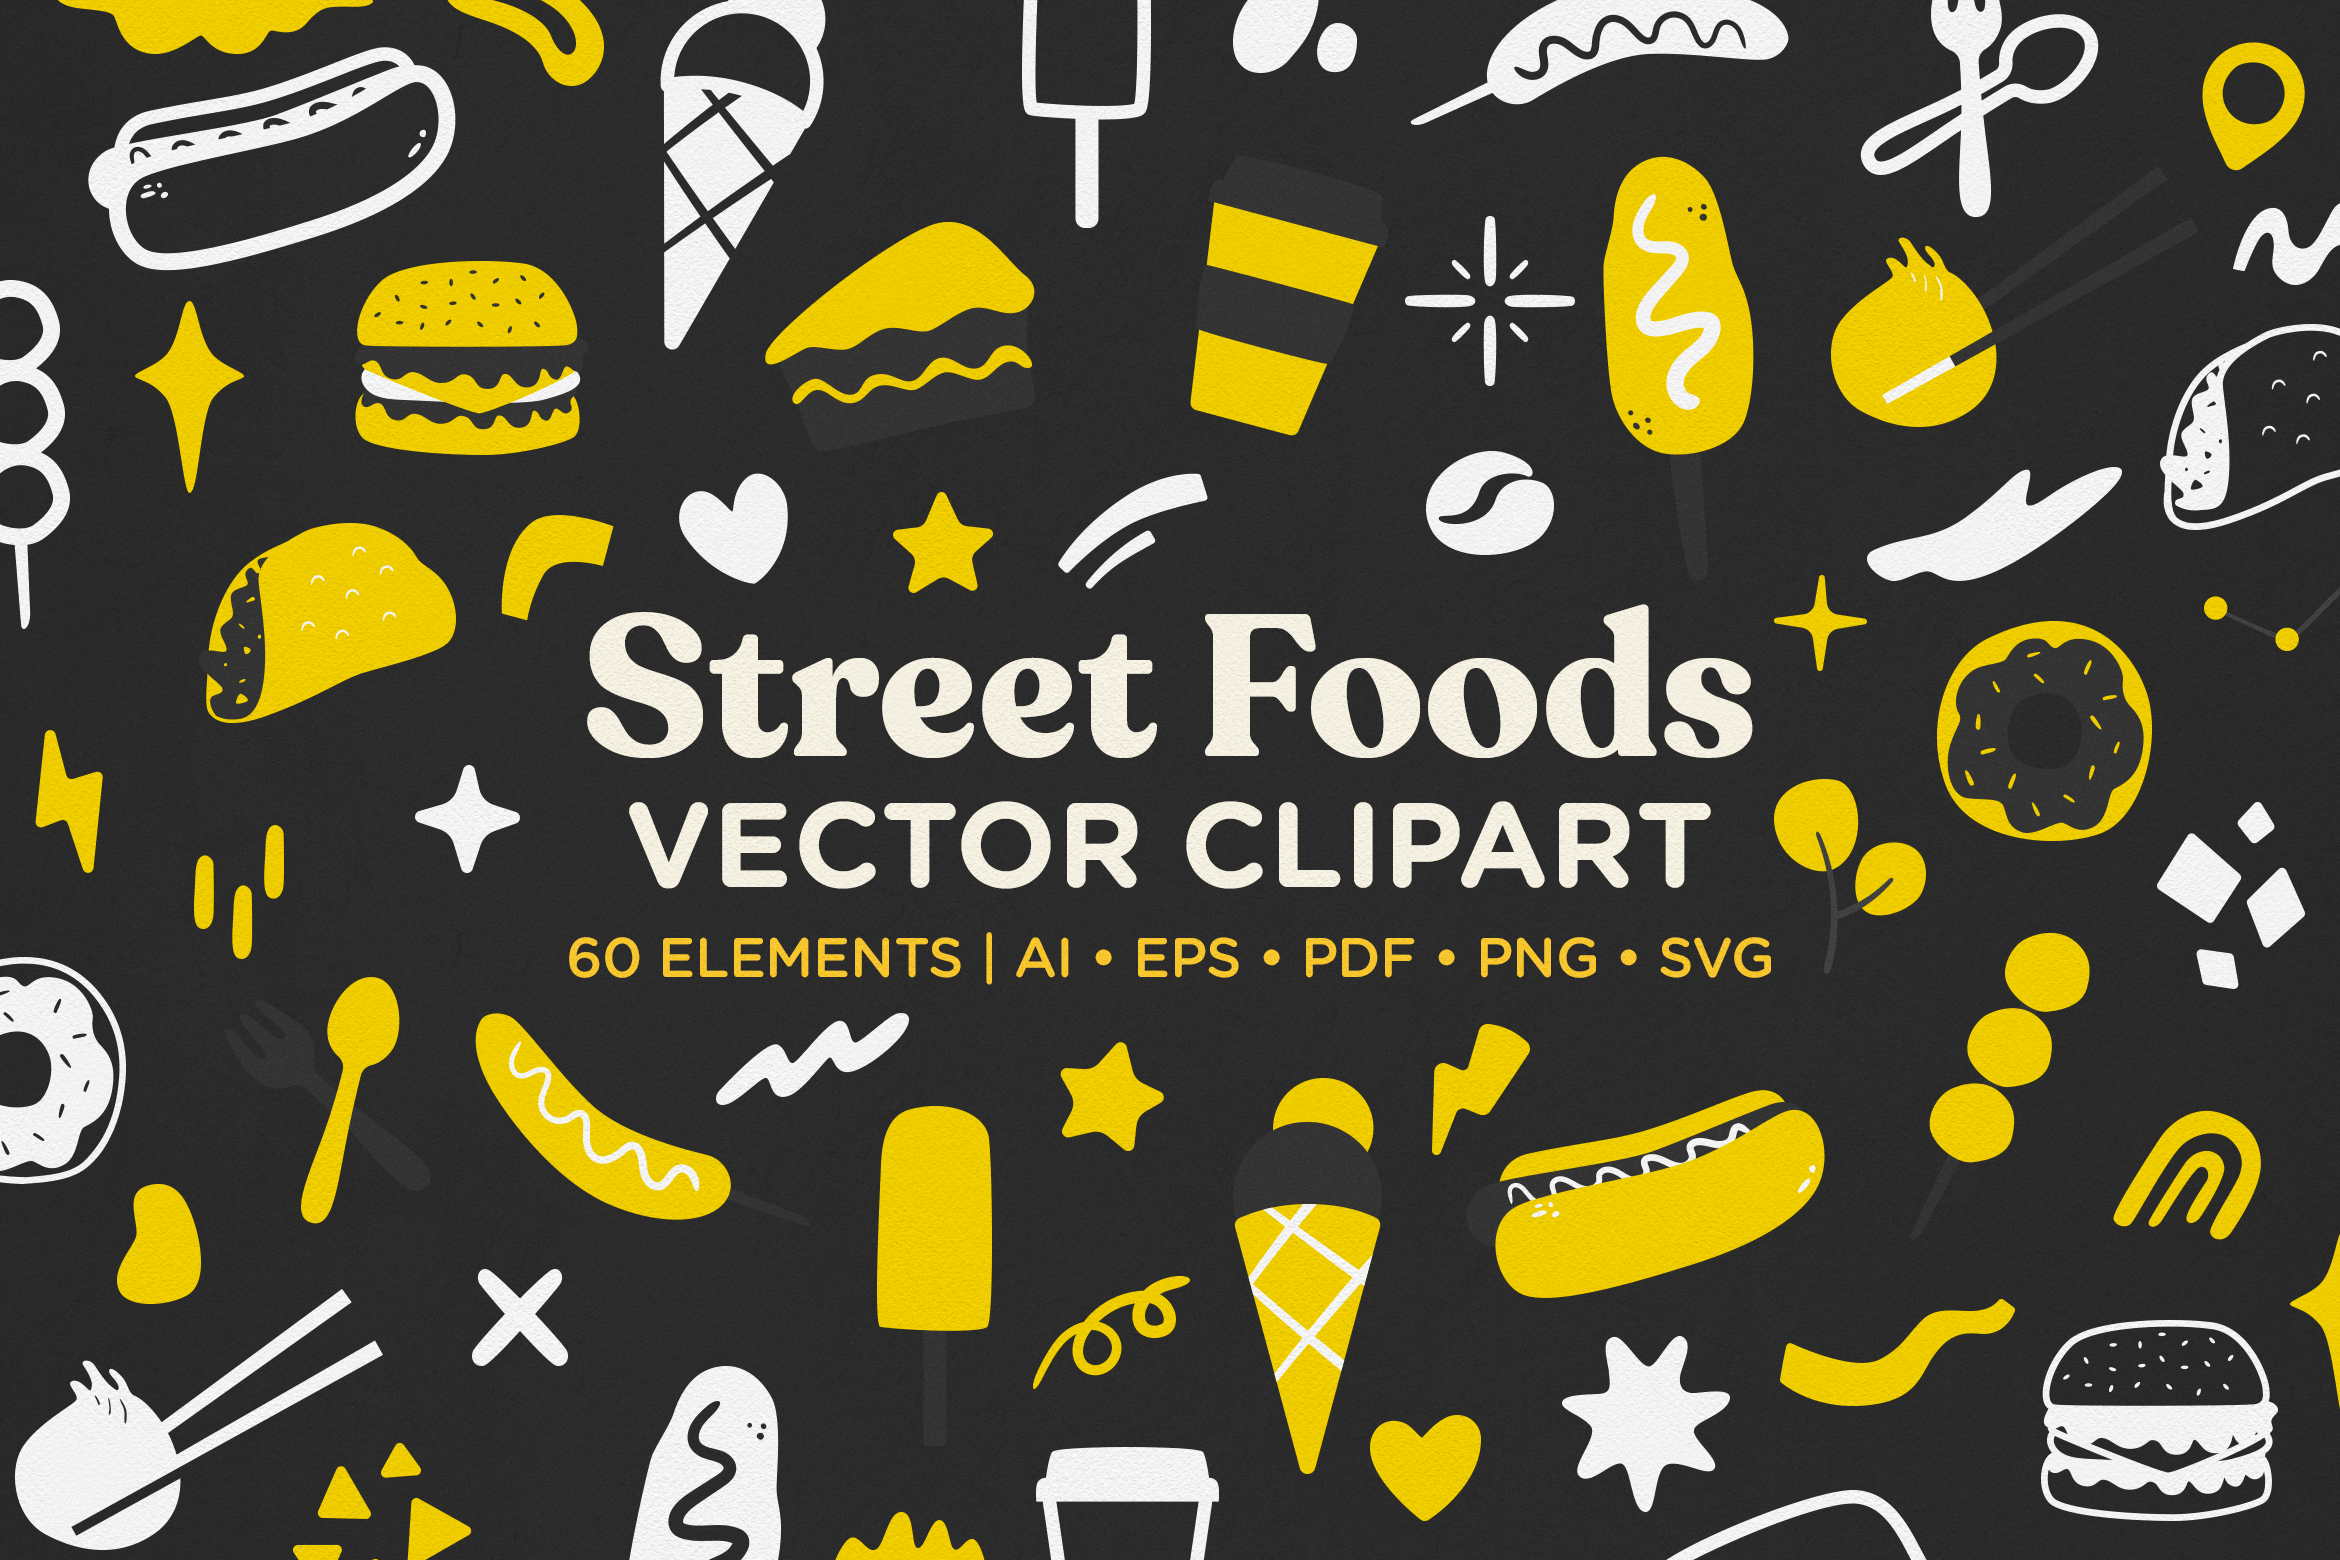 Street Food Vector Clipart Pack Graphic By Telllu Creative Fabrica